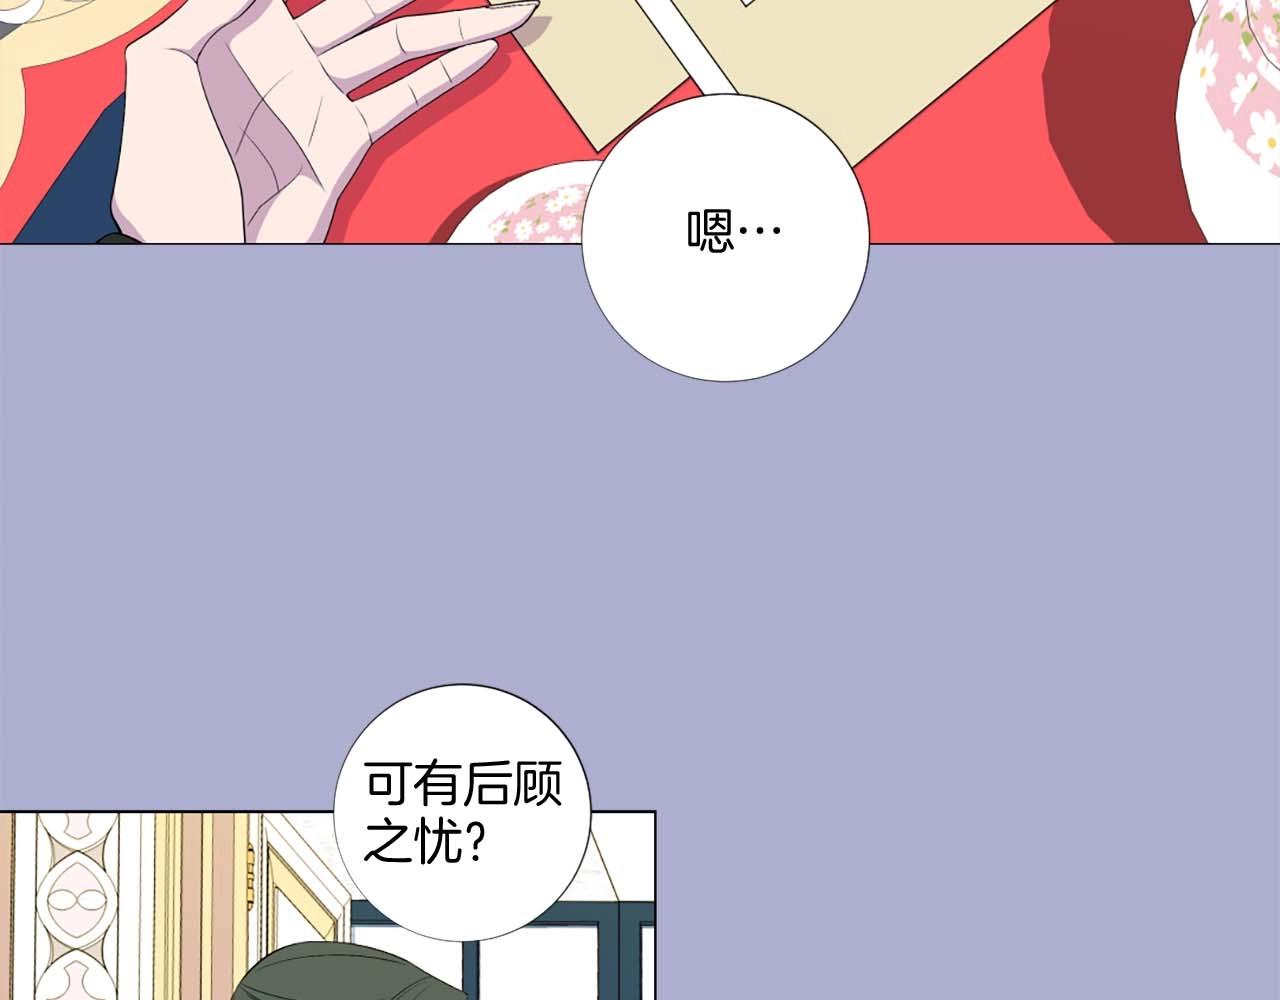 Lady to Queen-勝者爲後 - 第39話 證據確鑿！(2/3) - 6